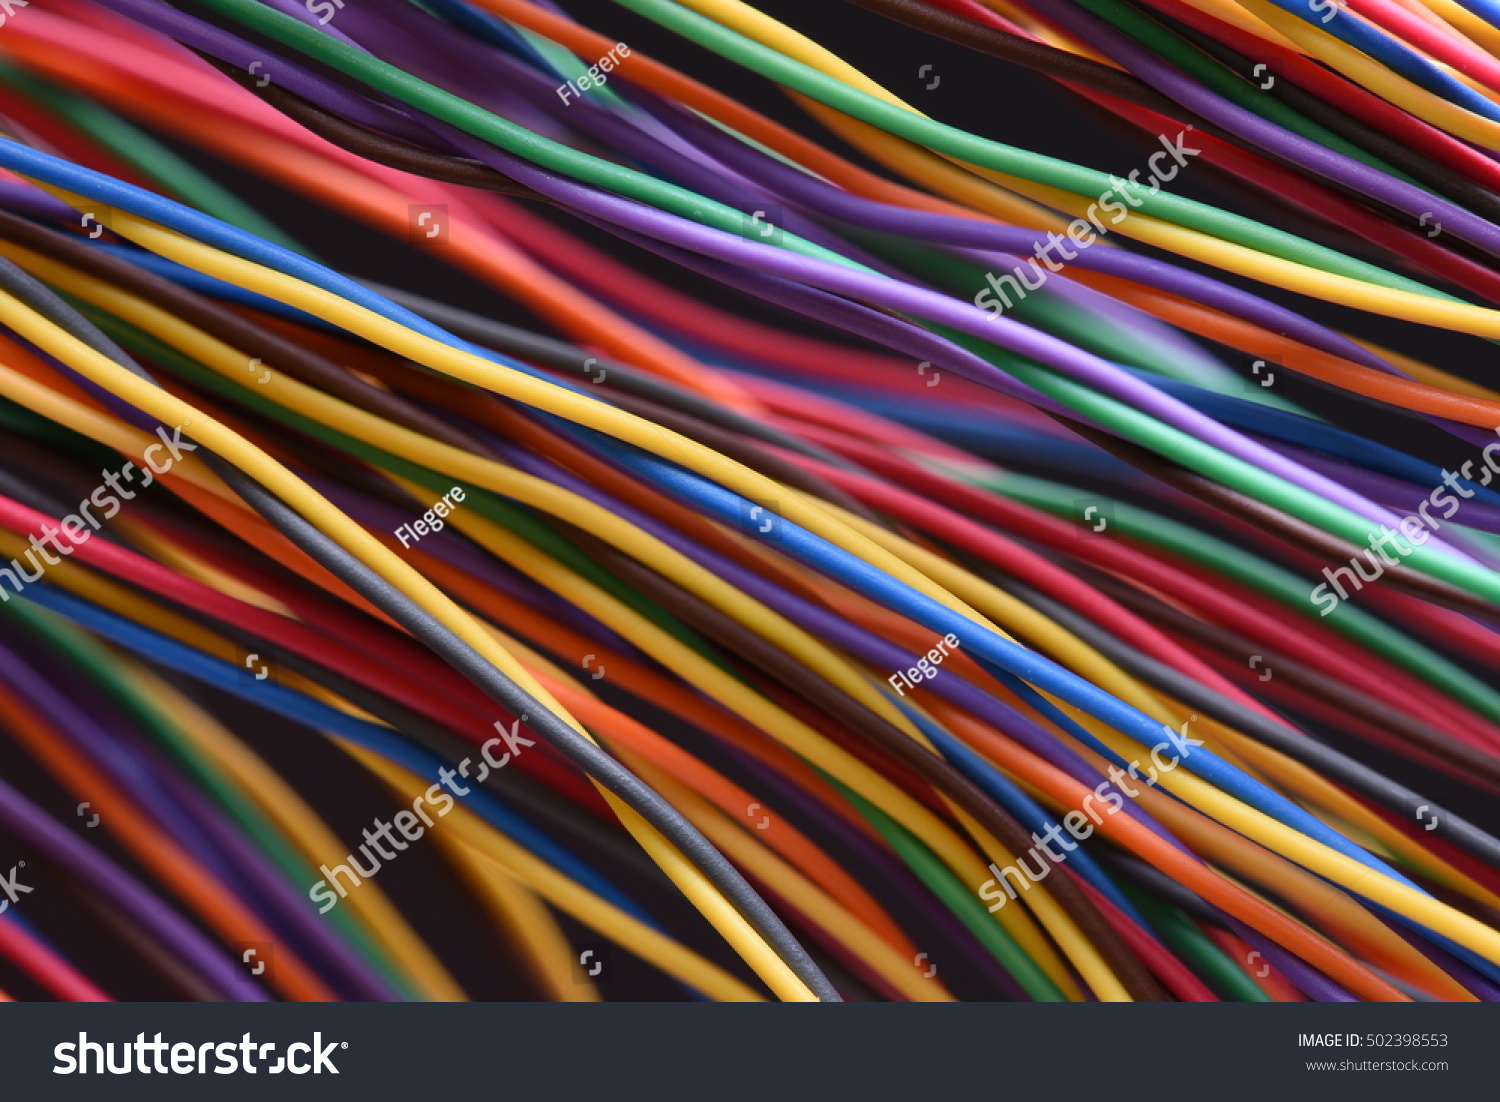 Colorful electrical wire used in telecommunication internet cable network and computer system #502398553